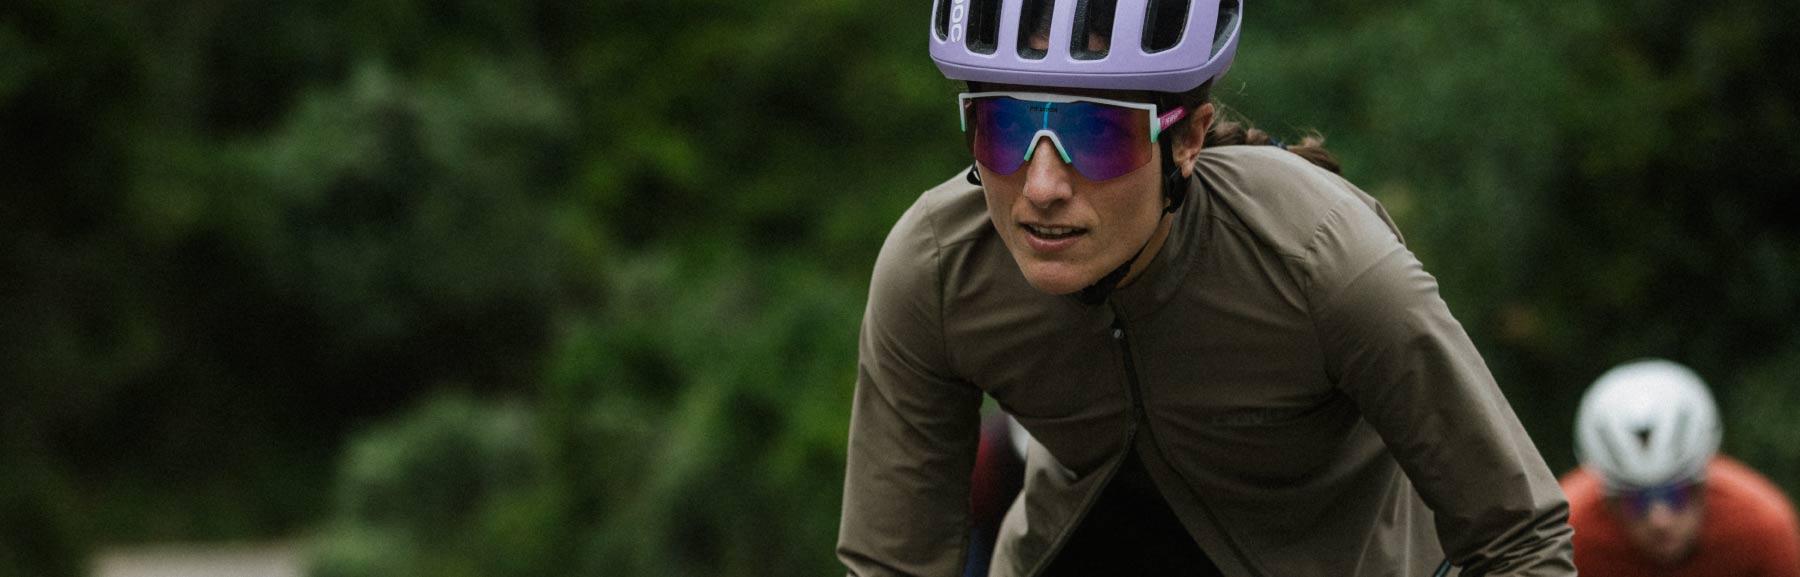 Women's Cycling Jackets and Gilets